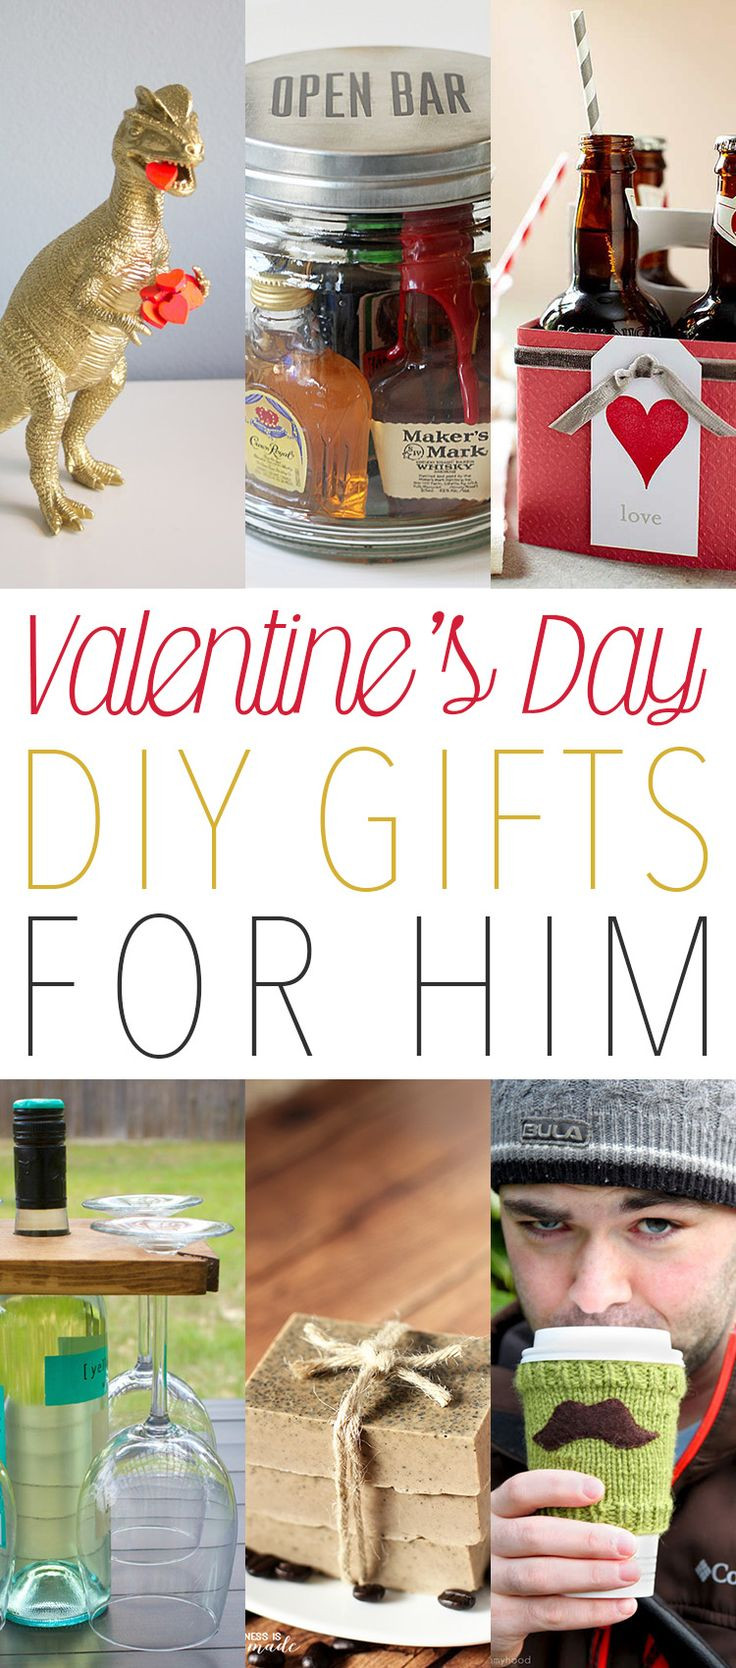 DIY Valentine'S Day Gifts For Him
 Best 25 Clever valentines for him ideas on Pinterest